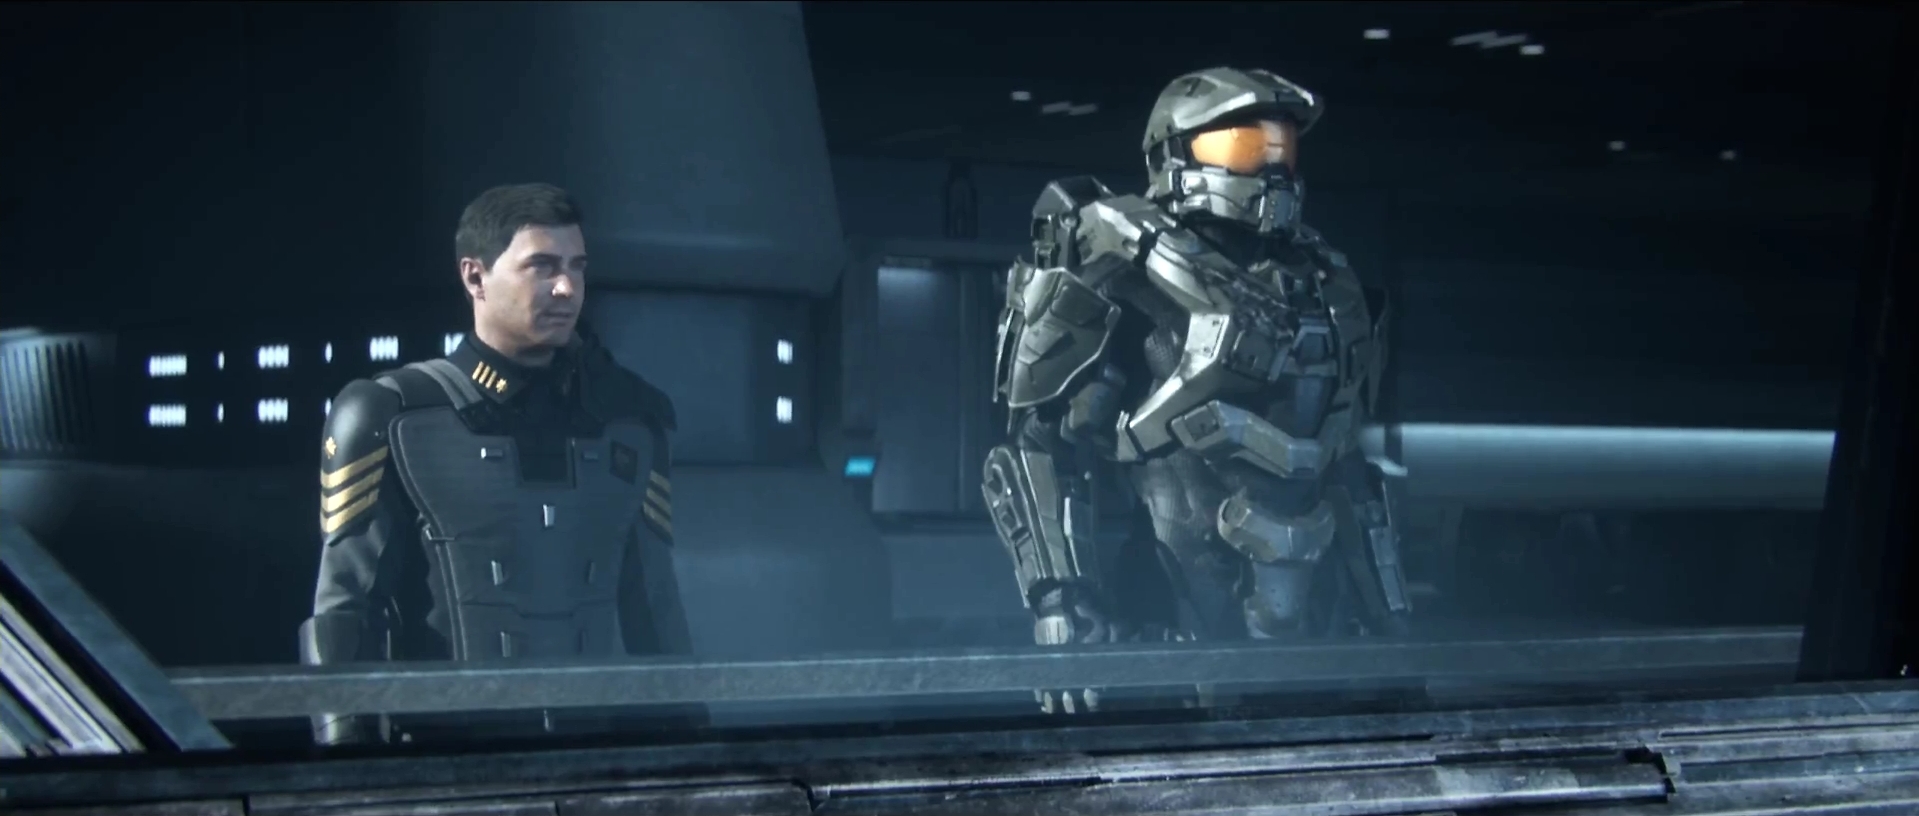 How tall is master chief? : r/halo